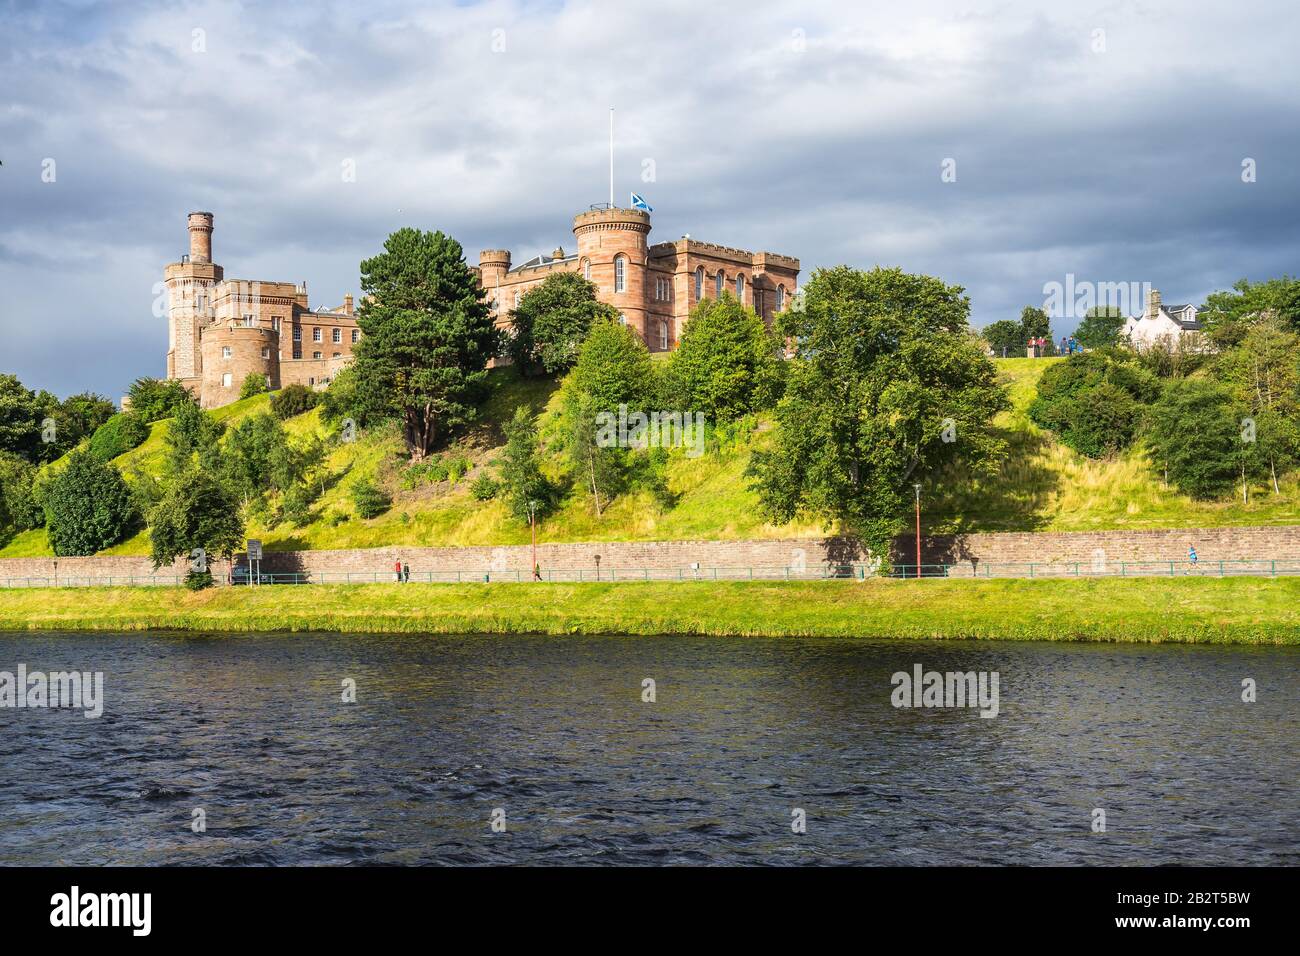 Beautiful shot of the famous Inverness Castle and Ness River in Scotland Stock Photo